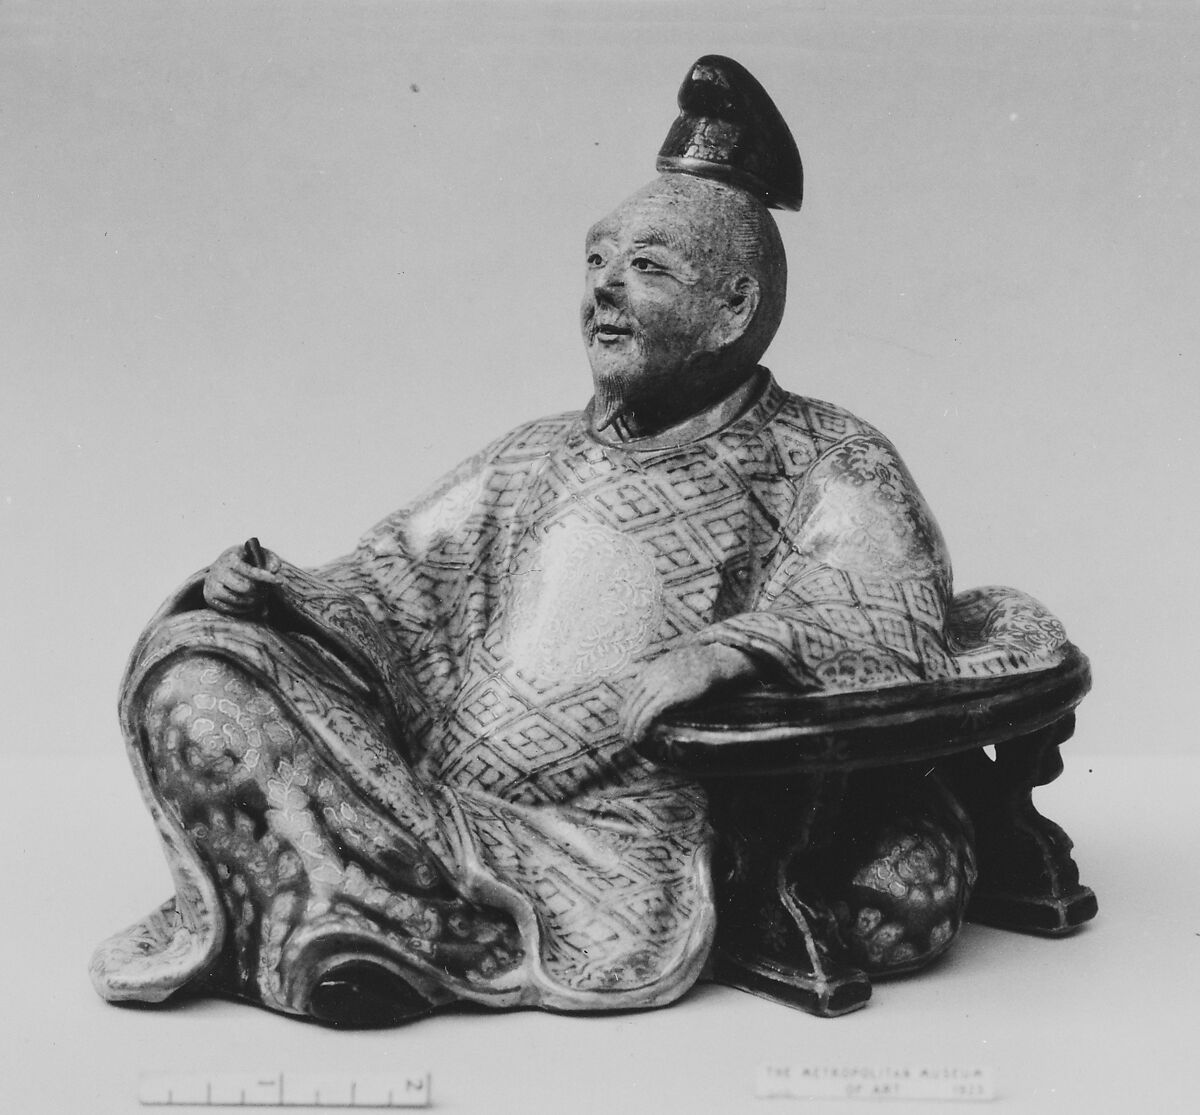 Ornament In form of Poet, Hitomaru, Faience, the face and hands unglazed; the rest of the figure decorated in polychrome and gold (Kiyomizu ware), Japan 